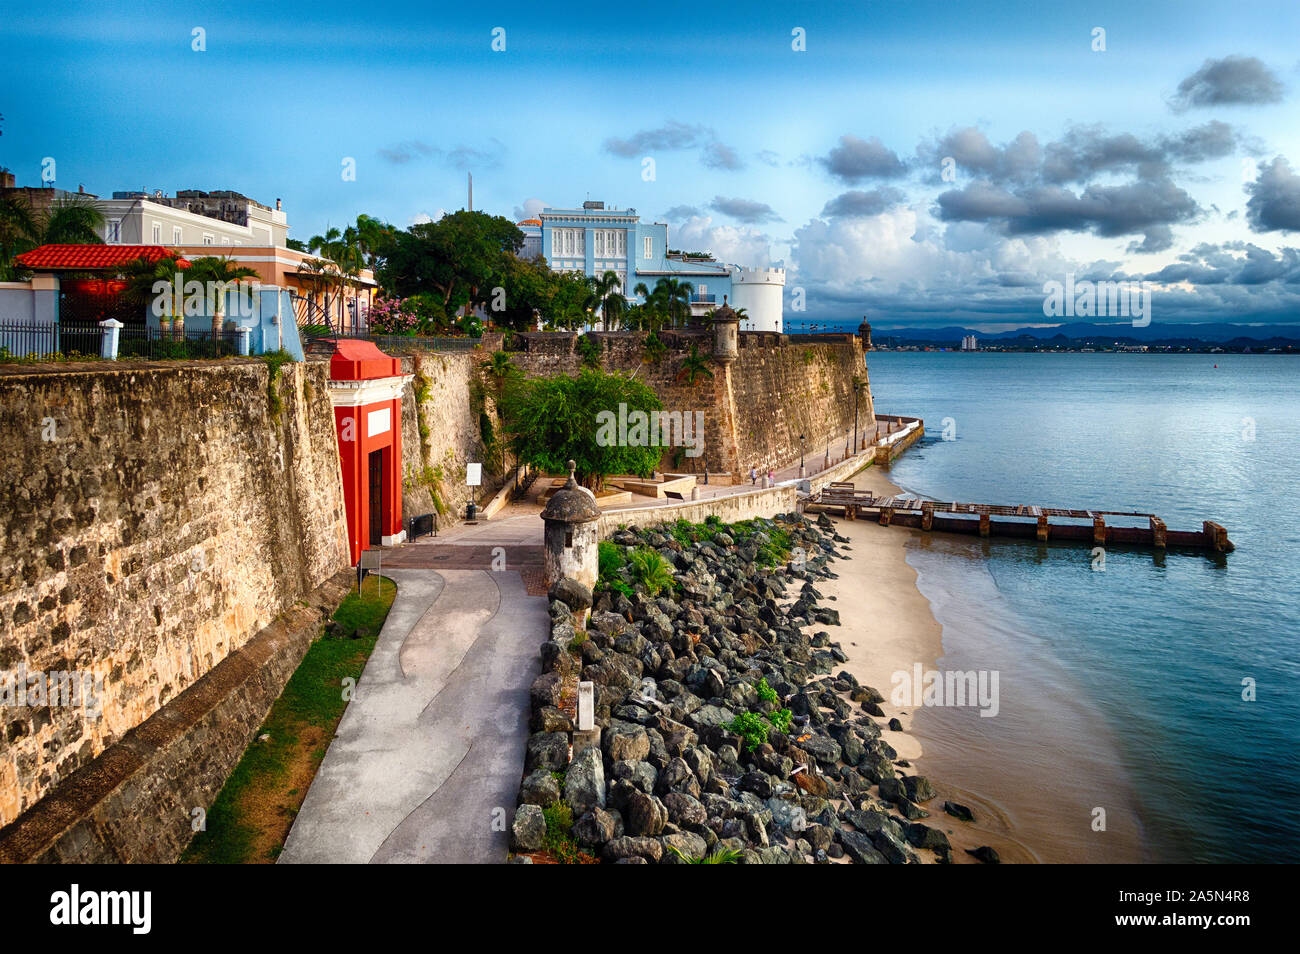 High Angle View of the The ity Gate and the La Fortelaza Building in Old San Juan, Puerto Rico Stock Photo